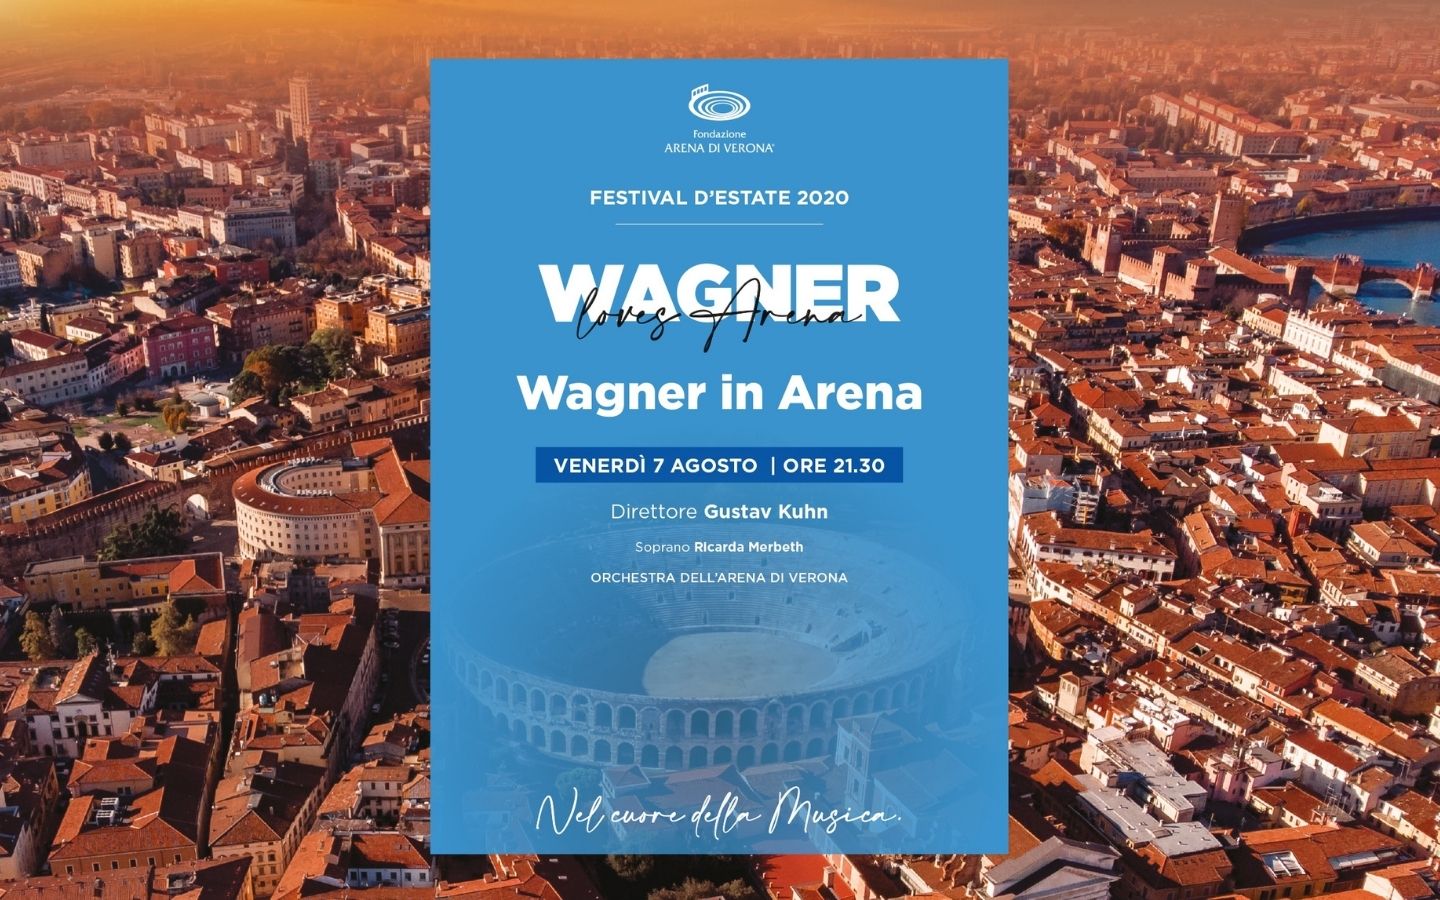 Wagner in arena